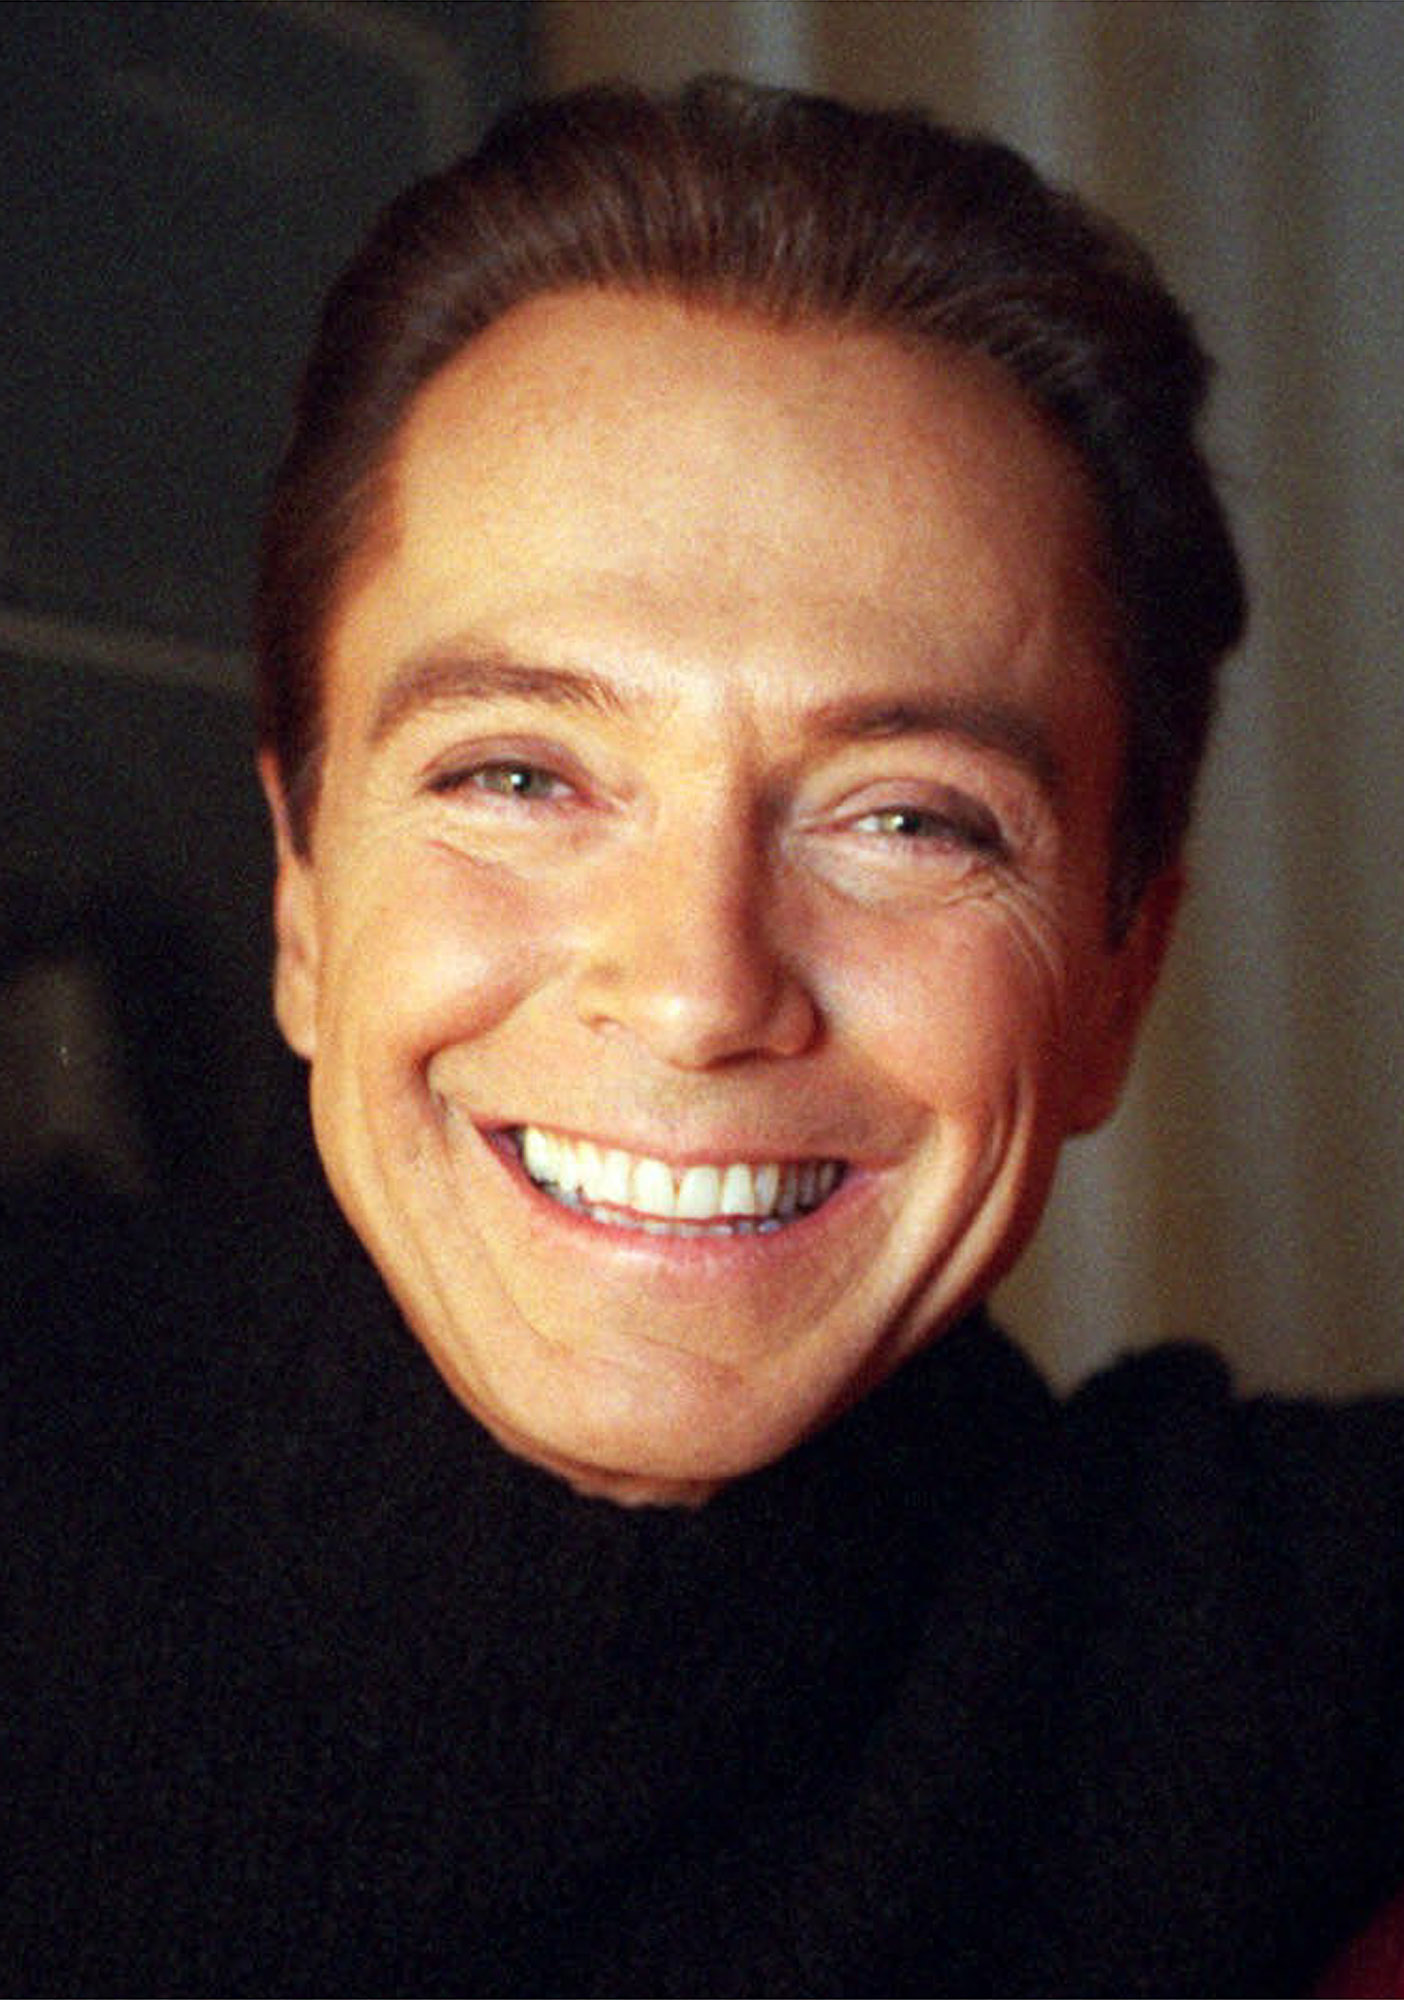 David Cassidy - Images Gallery